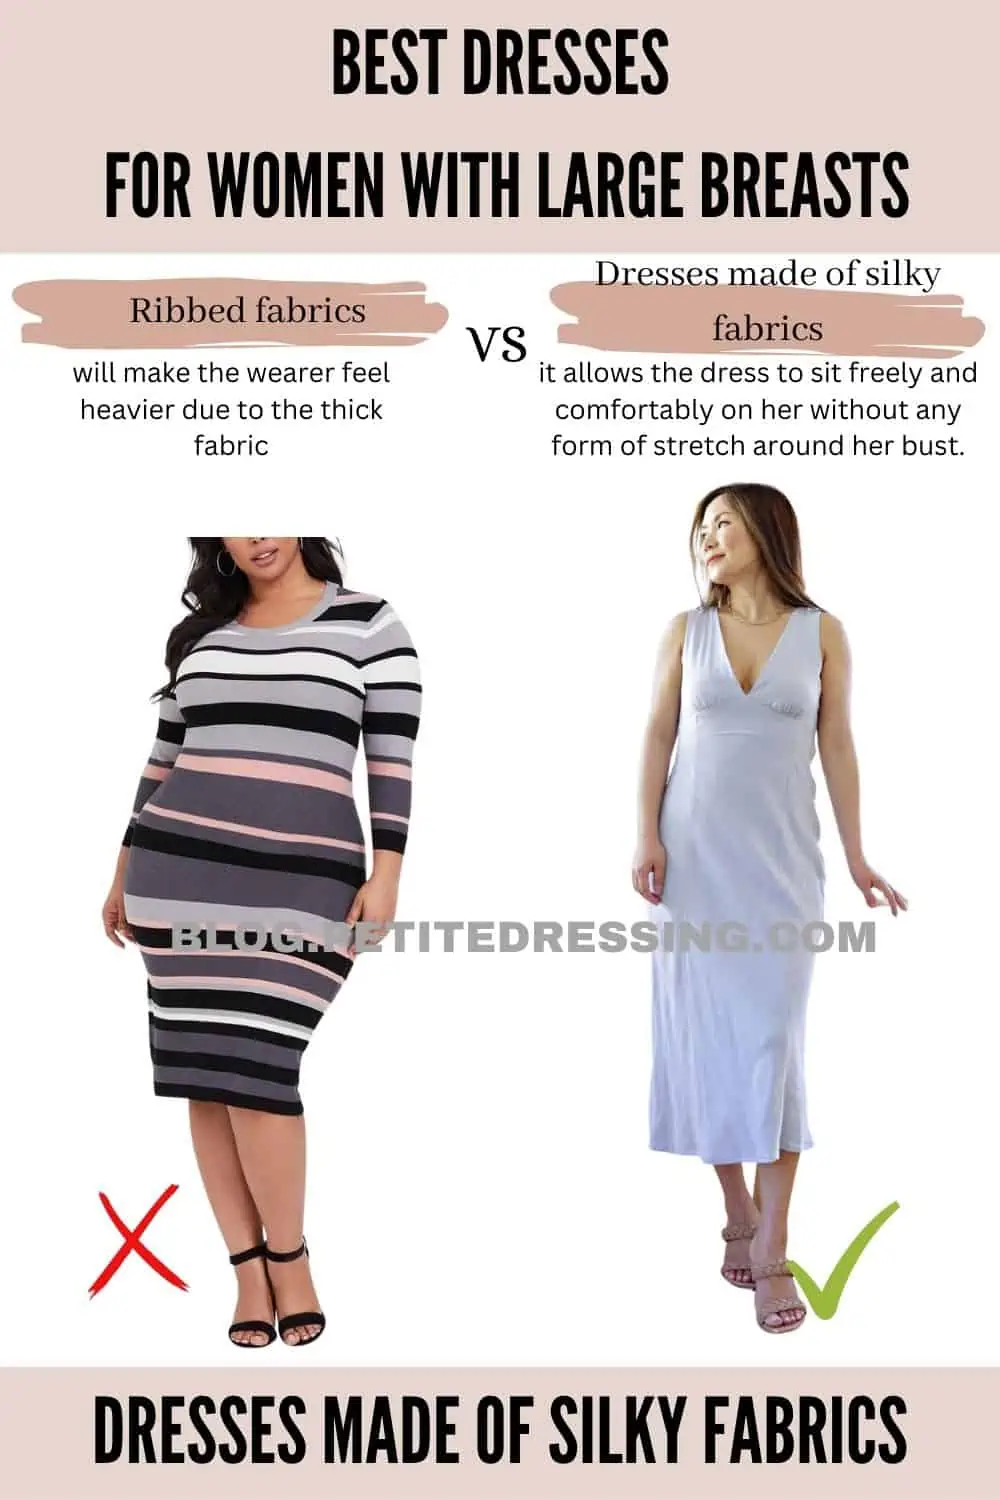 What are some decent looking clothes for women with large breasts? - Quora